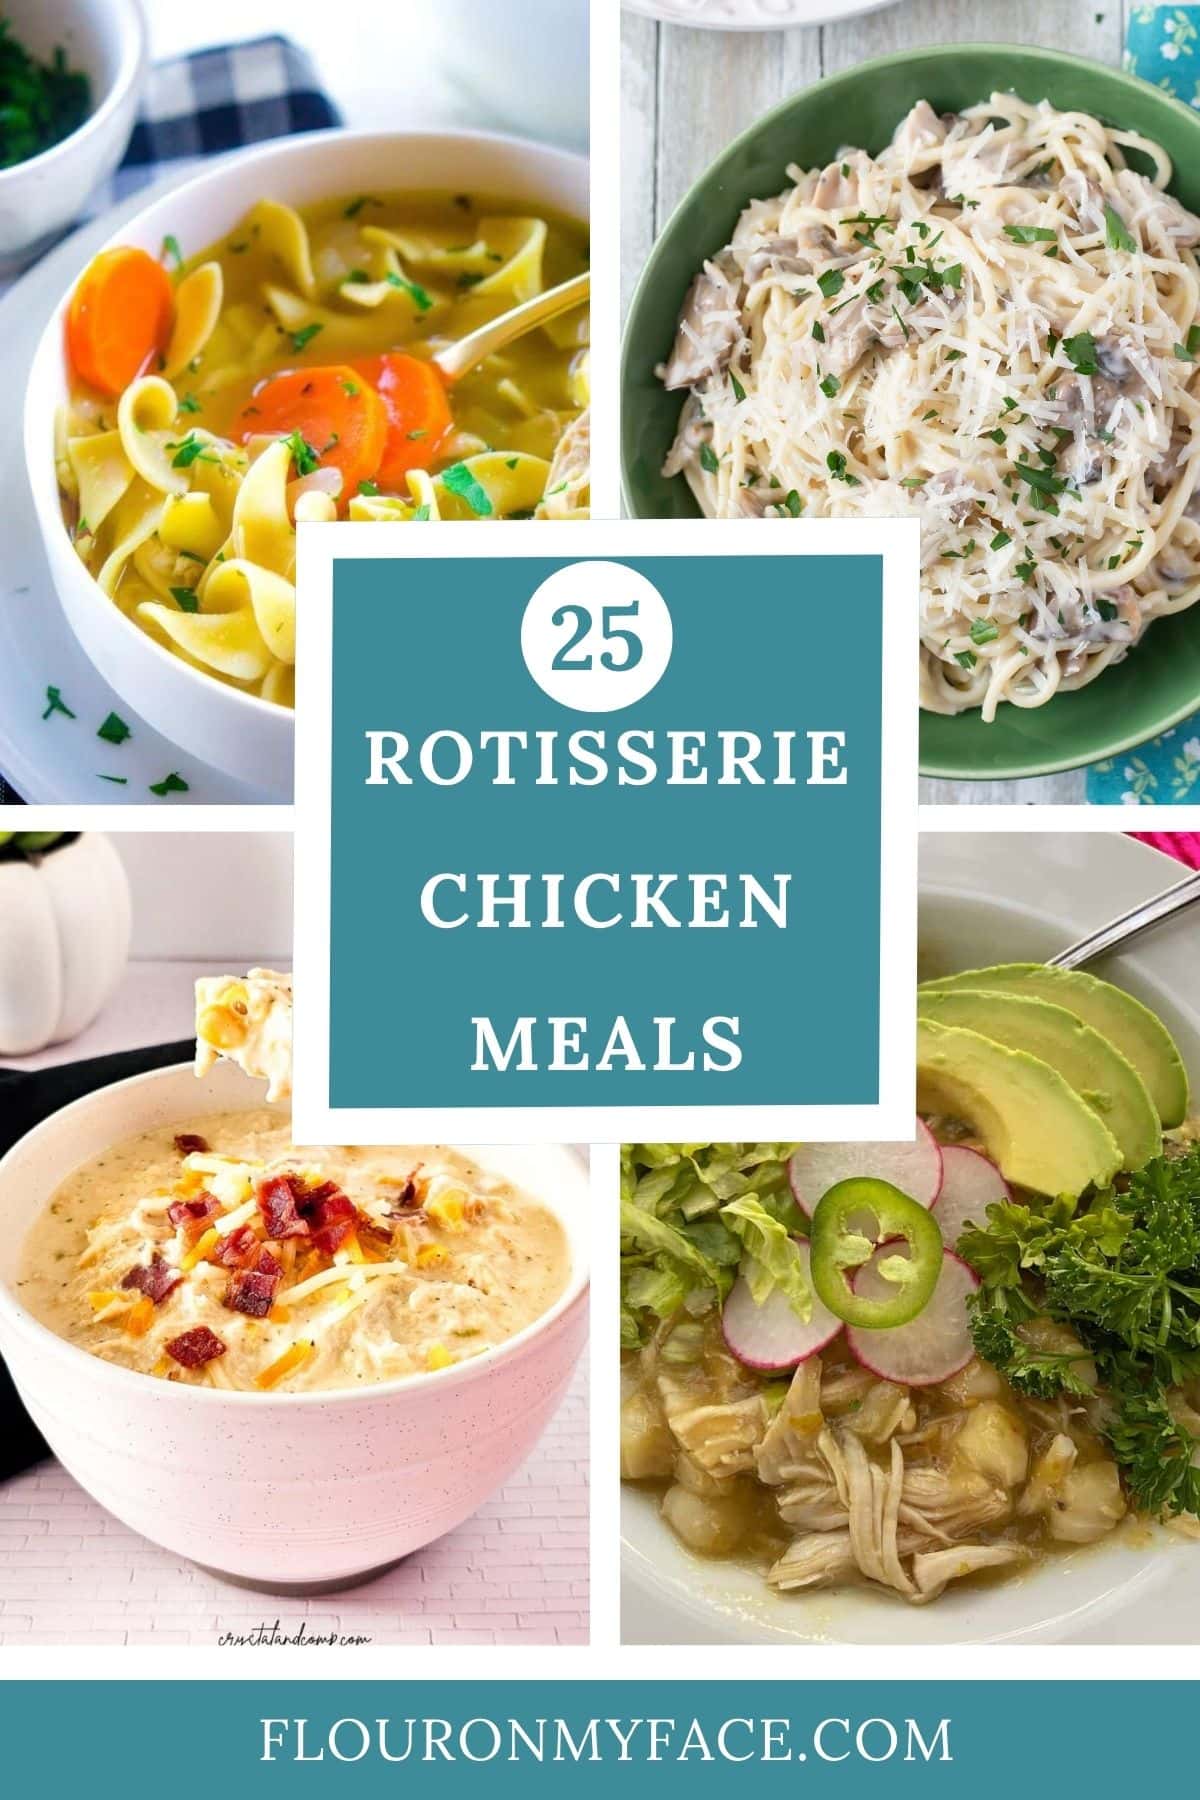 Large vertical image with 4 recipe previews for 25 Rotisserie Chicken Meals recipe roundup.